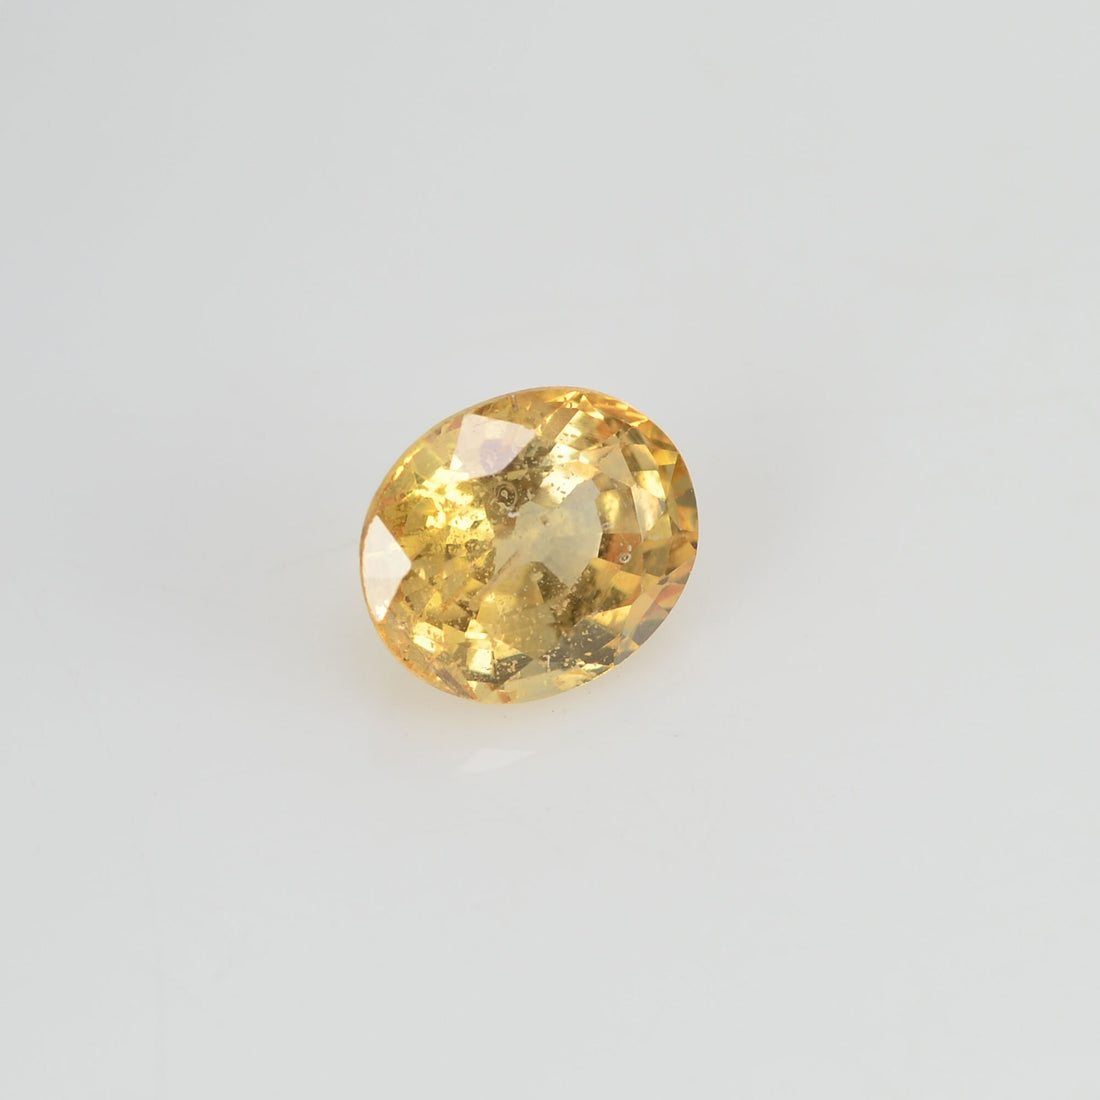 0.89 cts Natural Yellow Sapphire Loose Gemstone Oval Cut